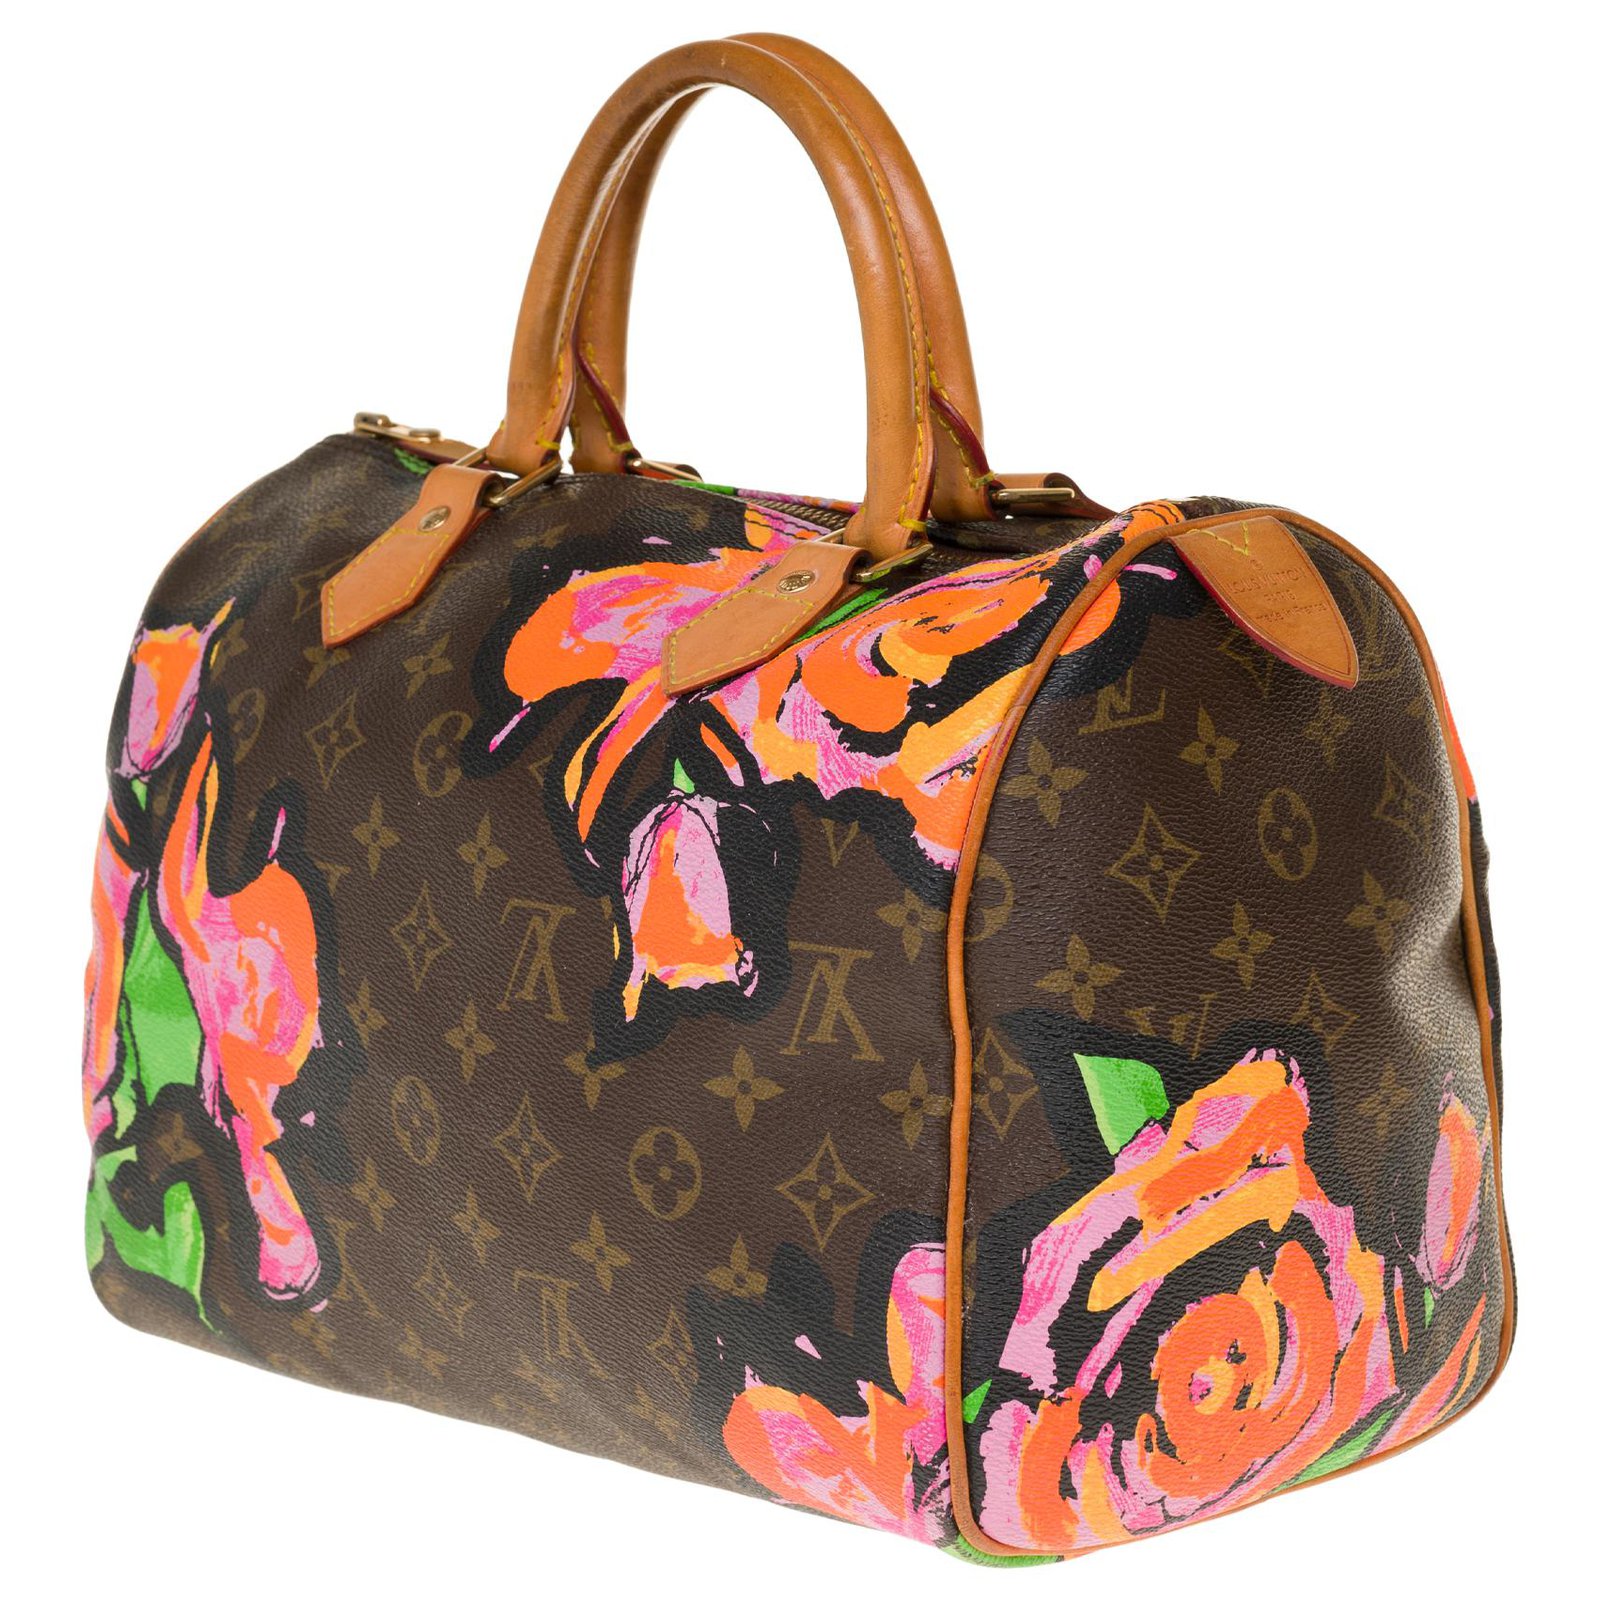 Louis Vuitton Speedy Handbag 30 Limited edition Roses by Stephen